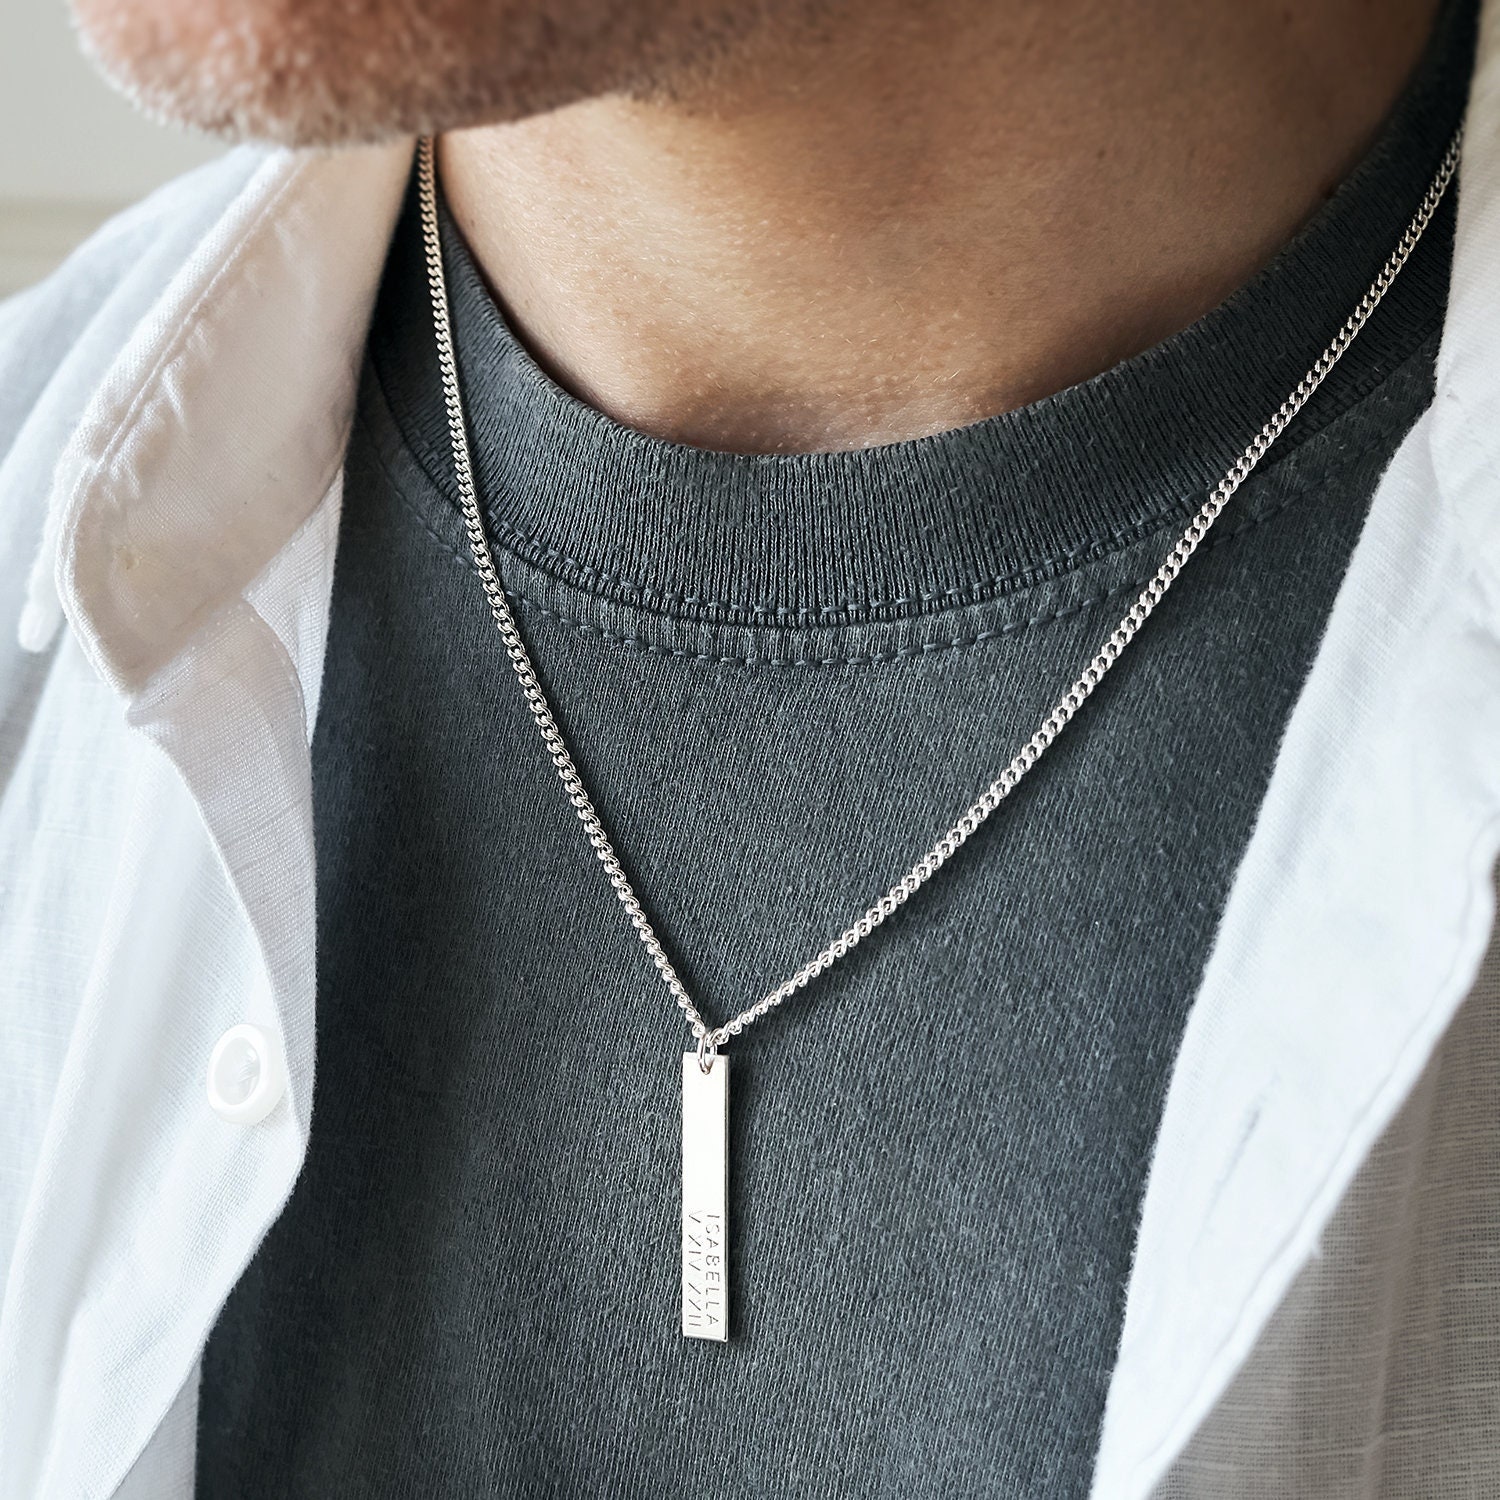 Zysta Silver Cool Simple Bar Necklace Men Women Dangle Vertical Cuboid  Stick Pendant 24 inches Chain Stainless Steel Jewelry Gift : Amazon.in:  Fashion